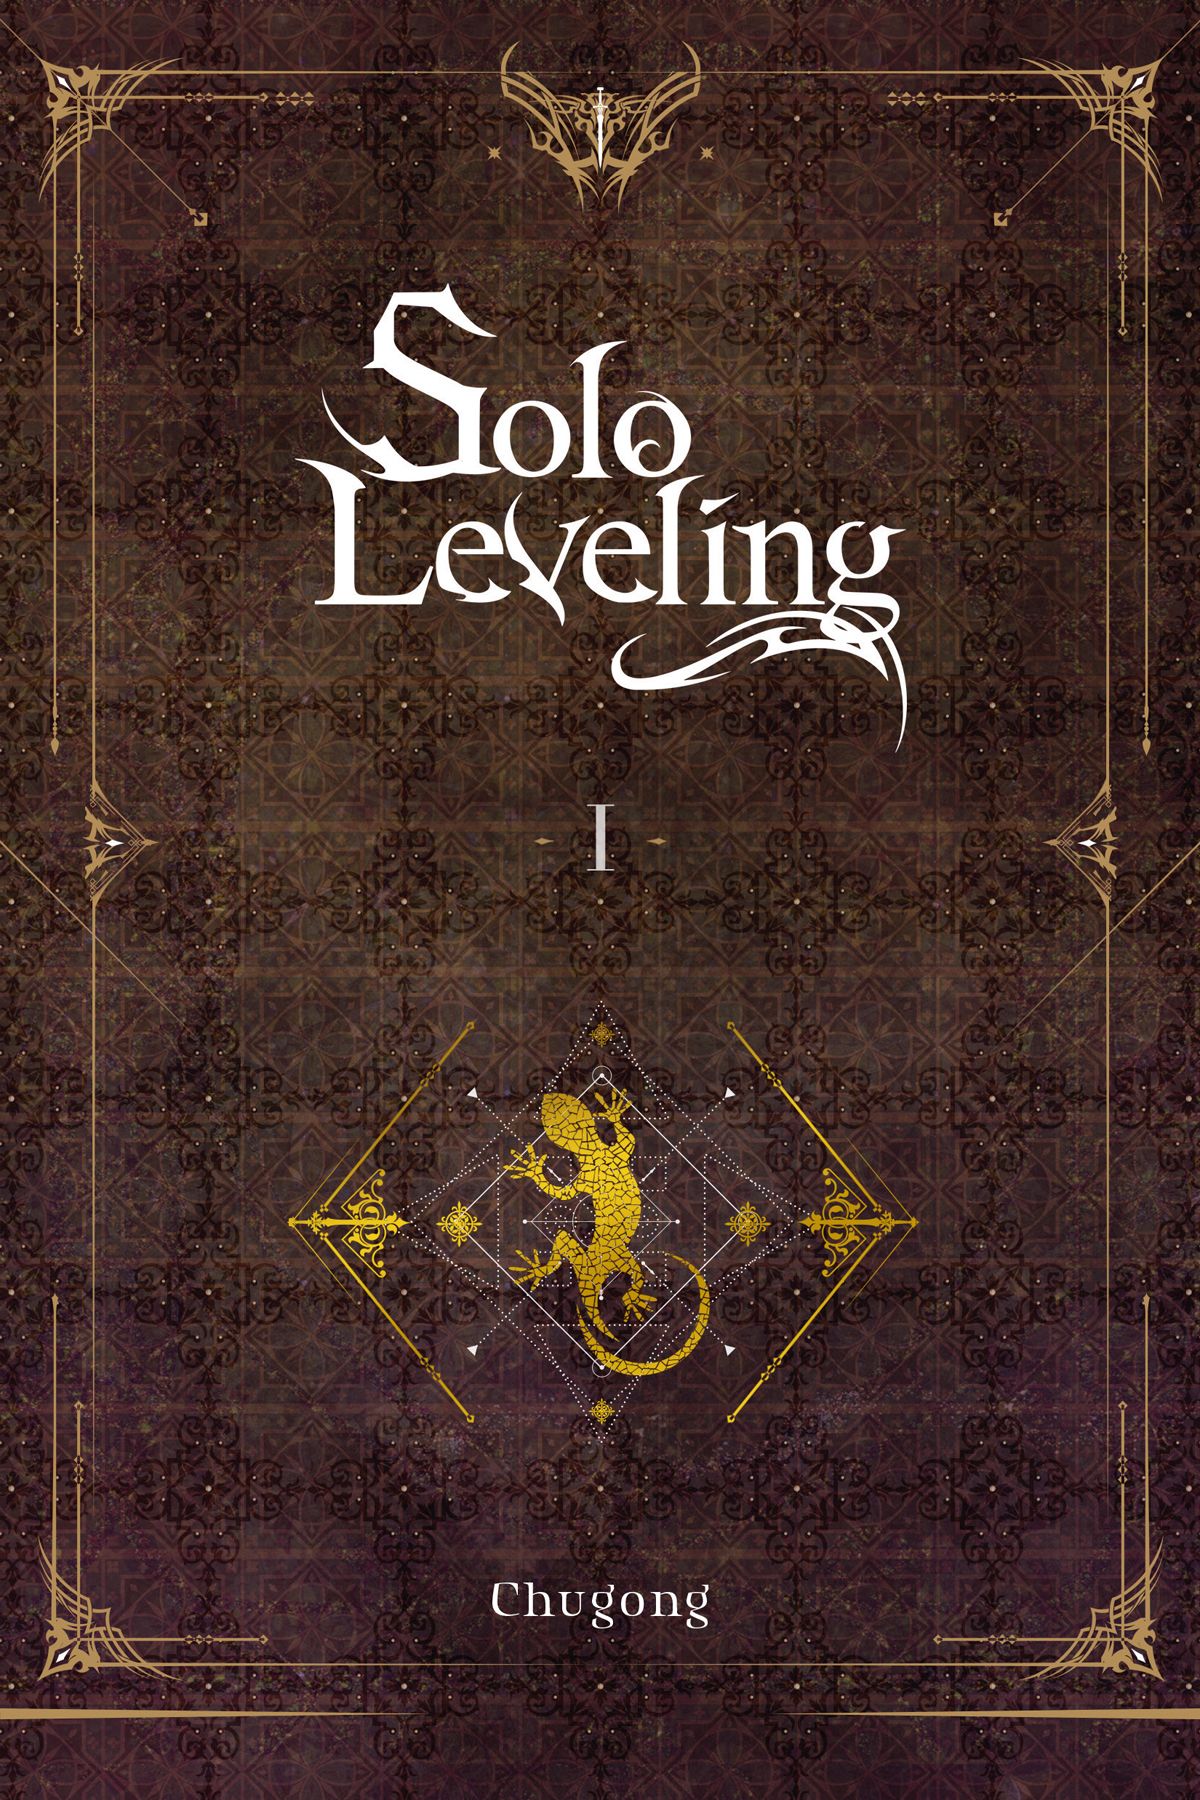 Reseña - Solo Leveling 01 